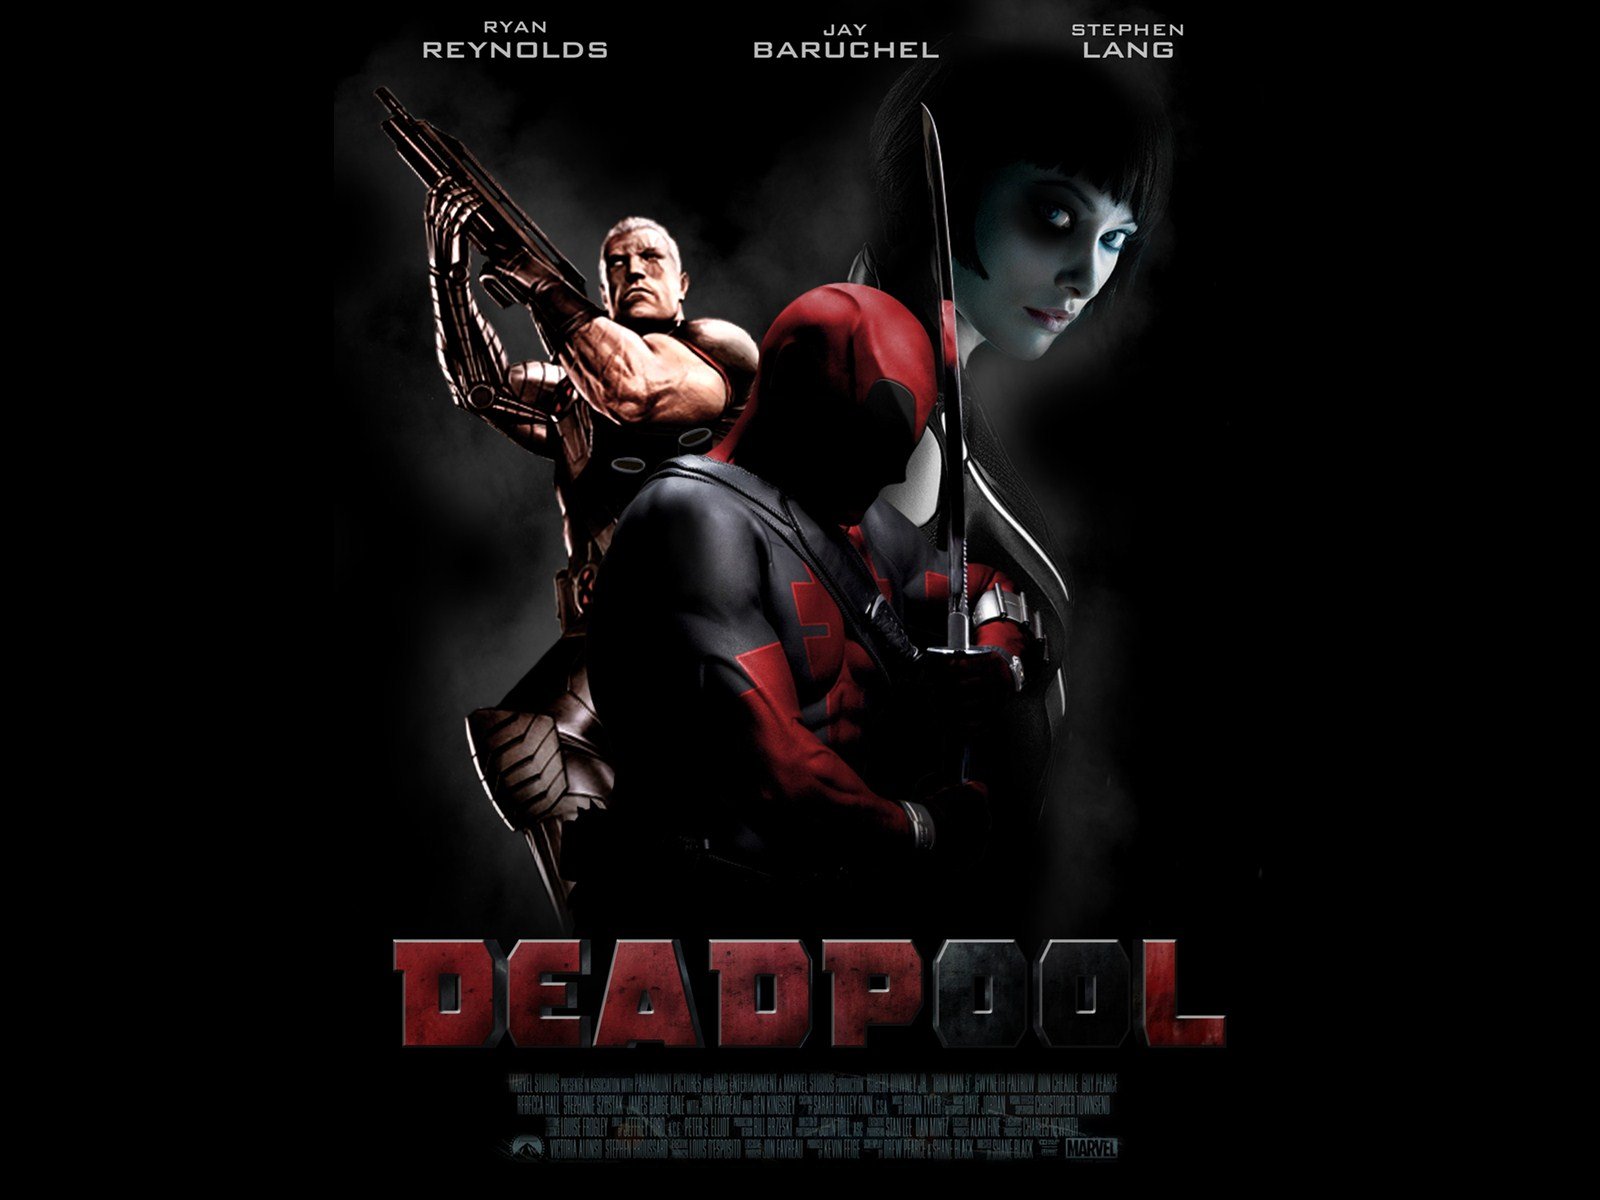  30 2015 By Stephen Comments Off on Deadpool Movie 2016 Wallpaper 1600x1200